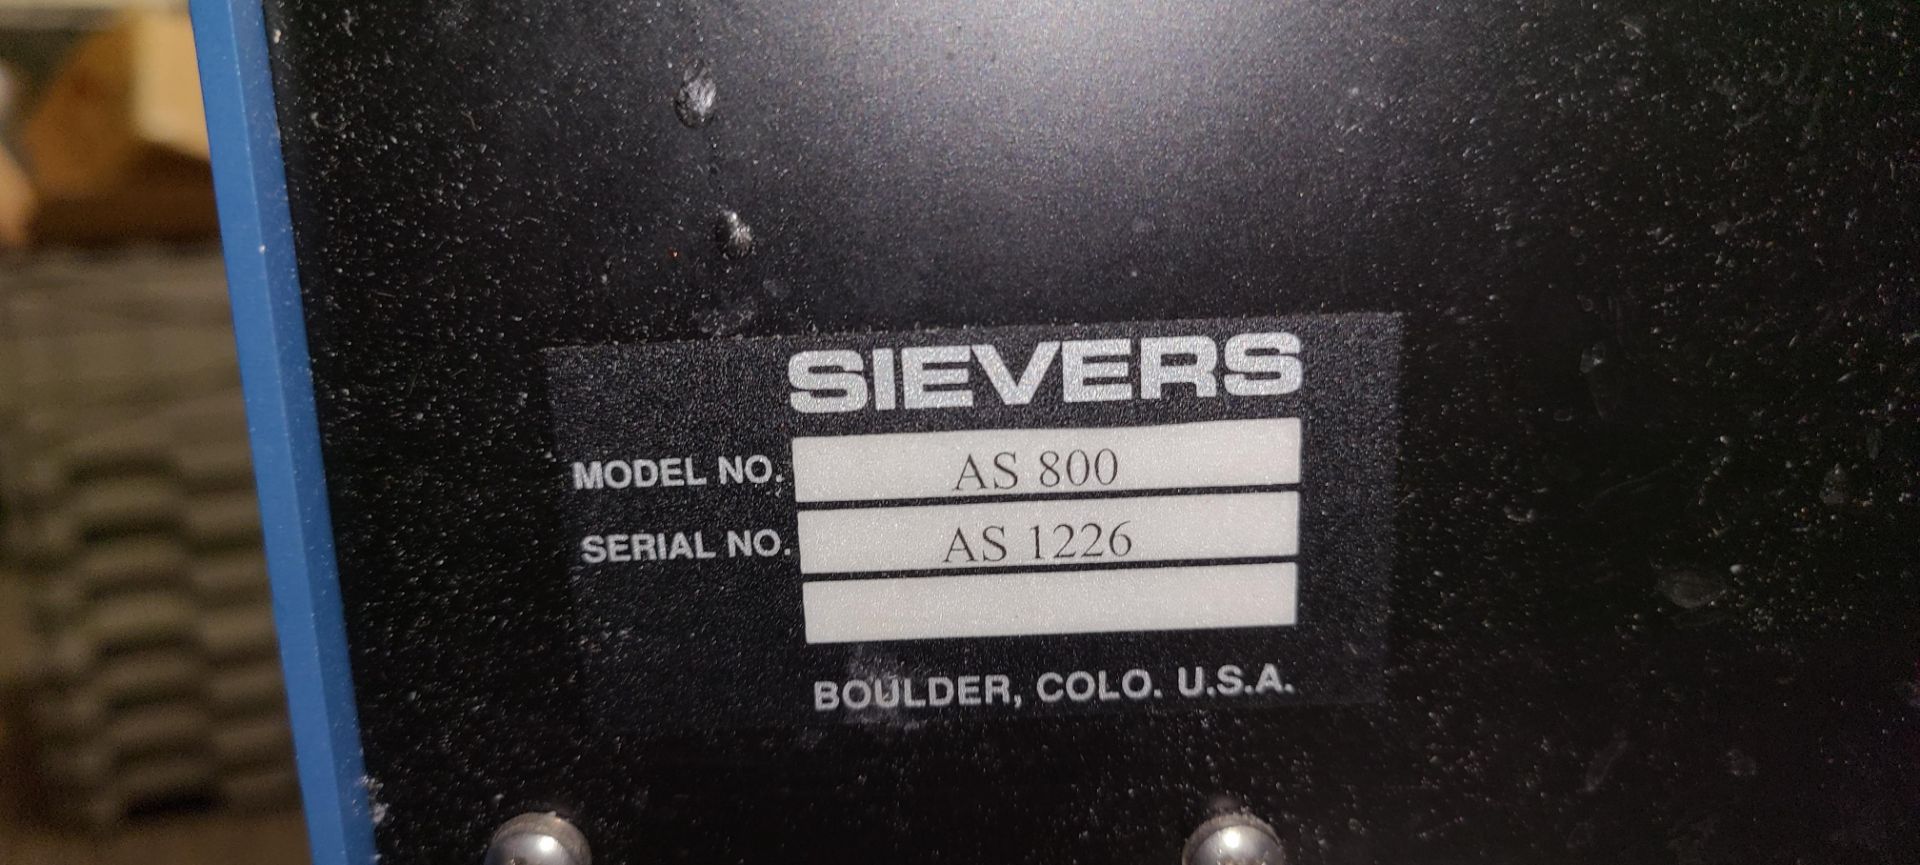 Sievers 800 Portable TOC Analyzer - Image 7 of 7